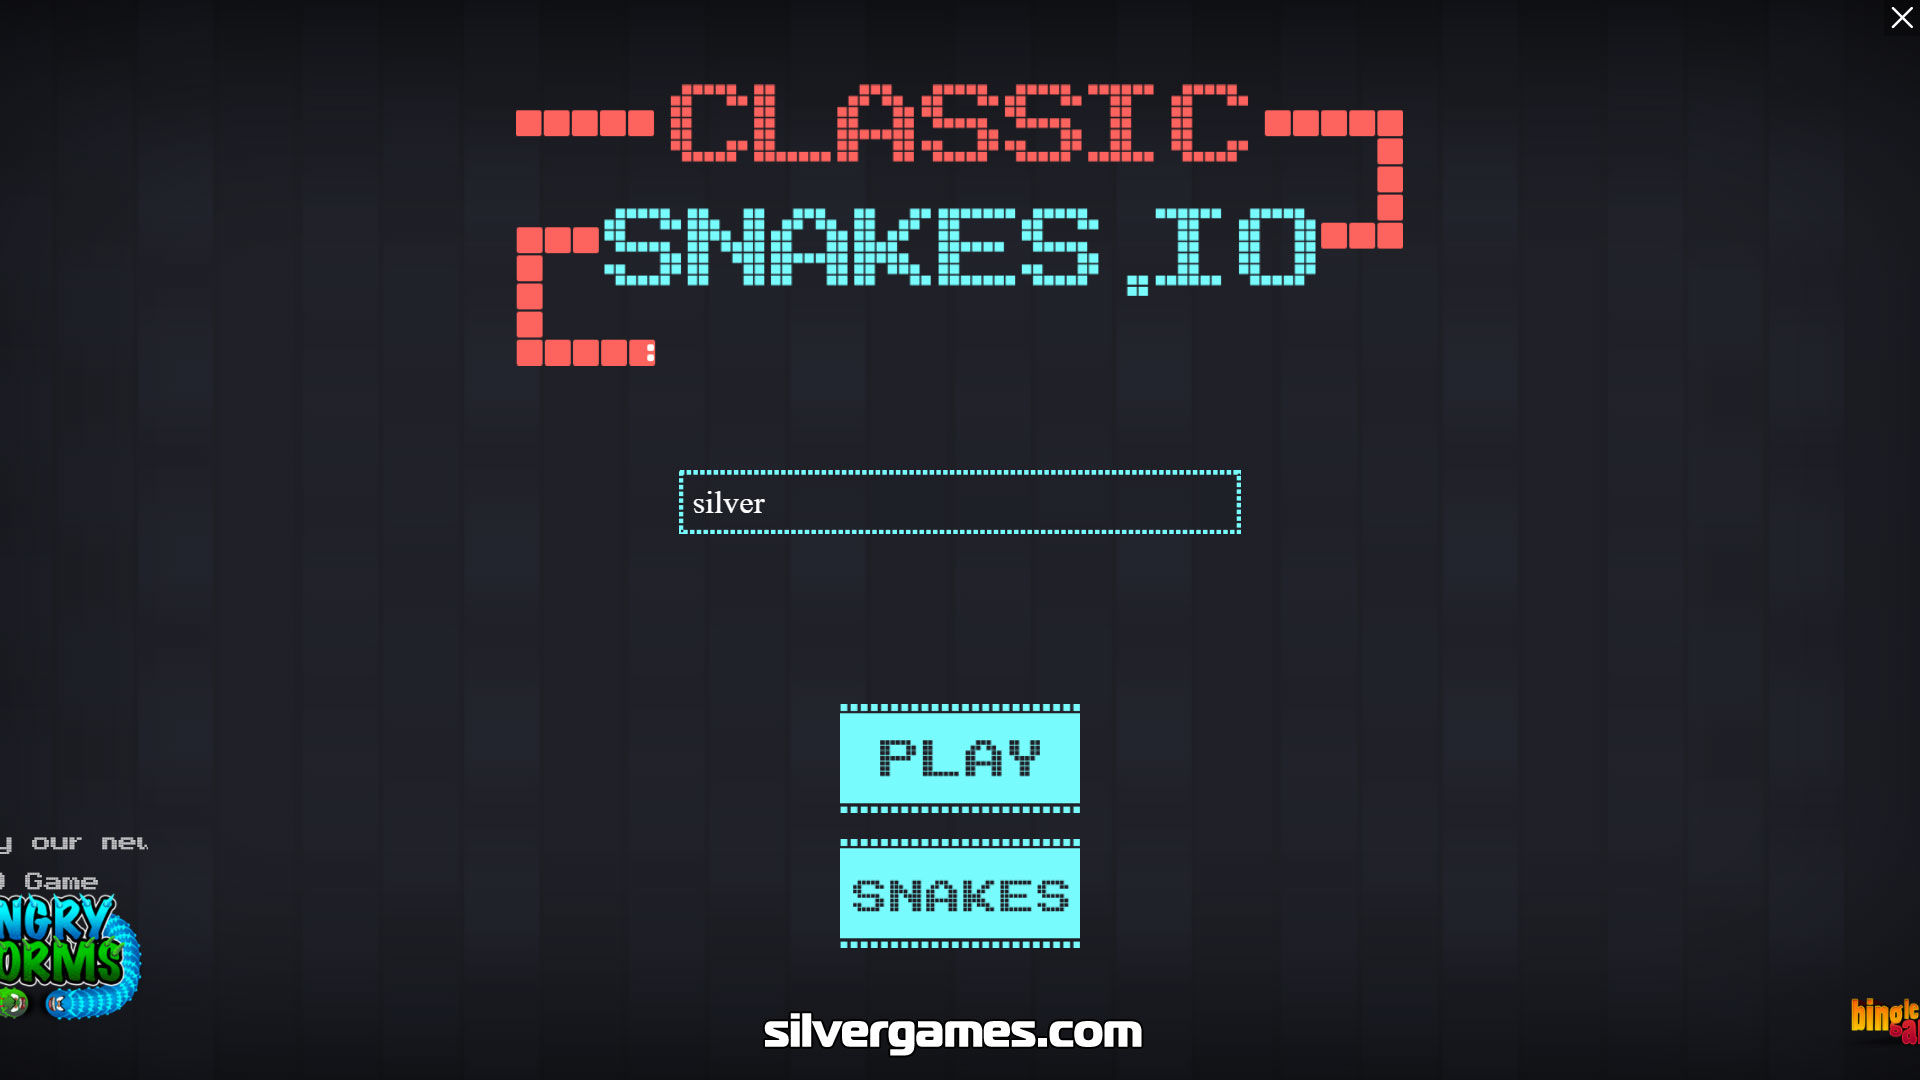 Paper Snakes io — Play for free at